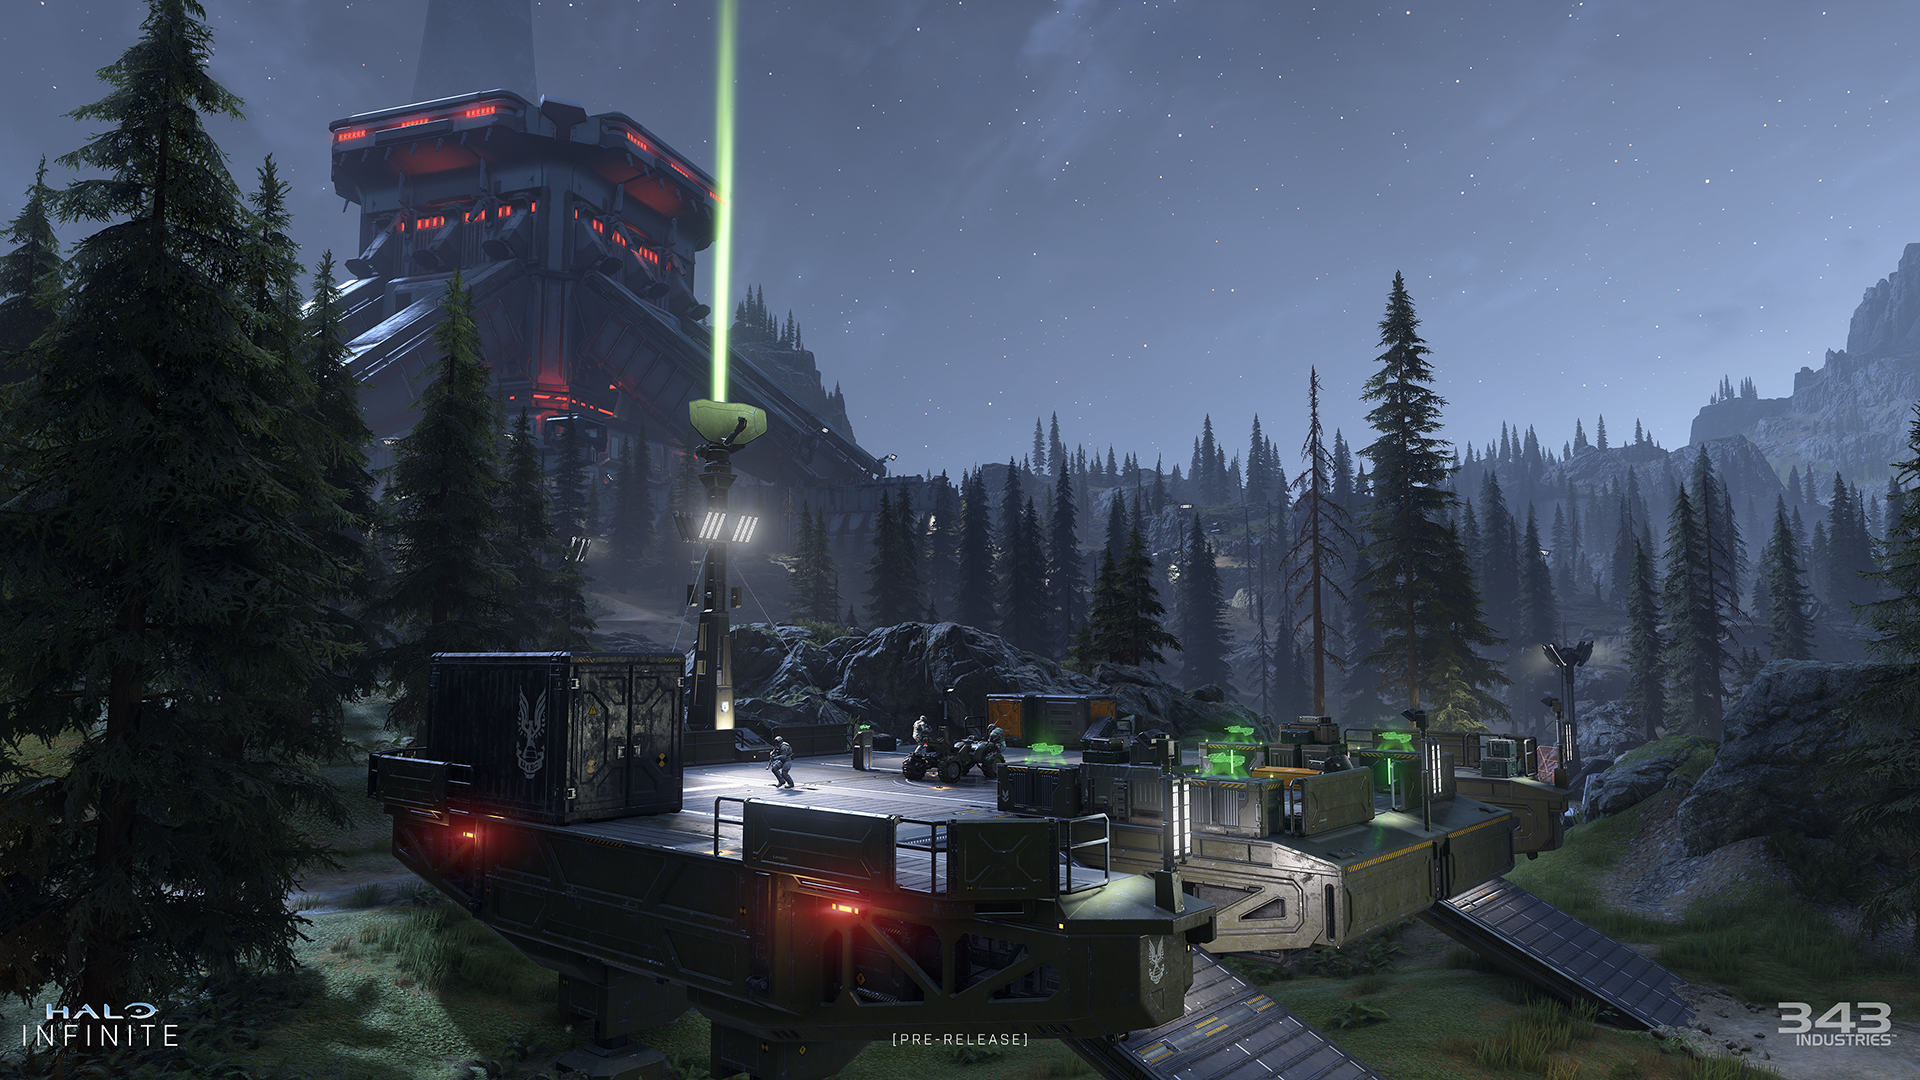 UNSC Forward Operating Base taken over by the Banished